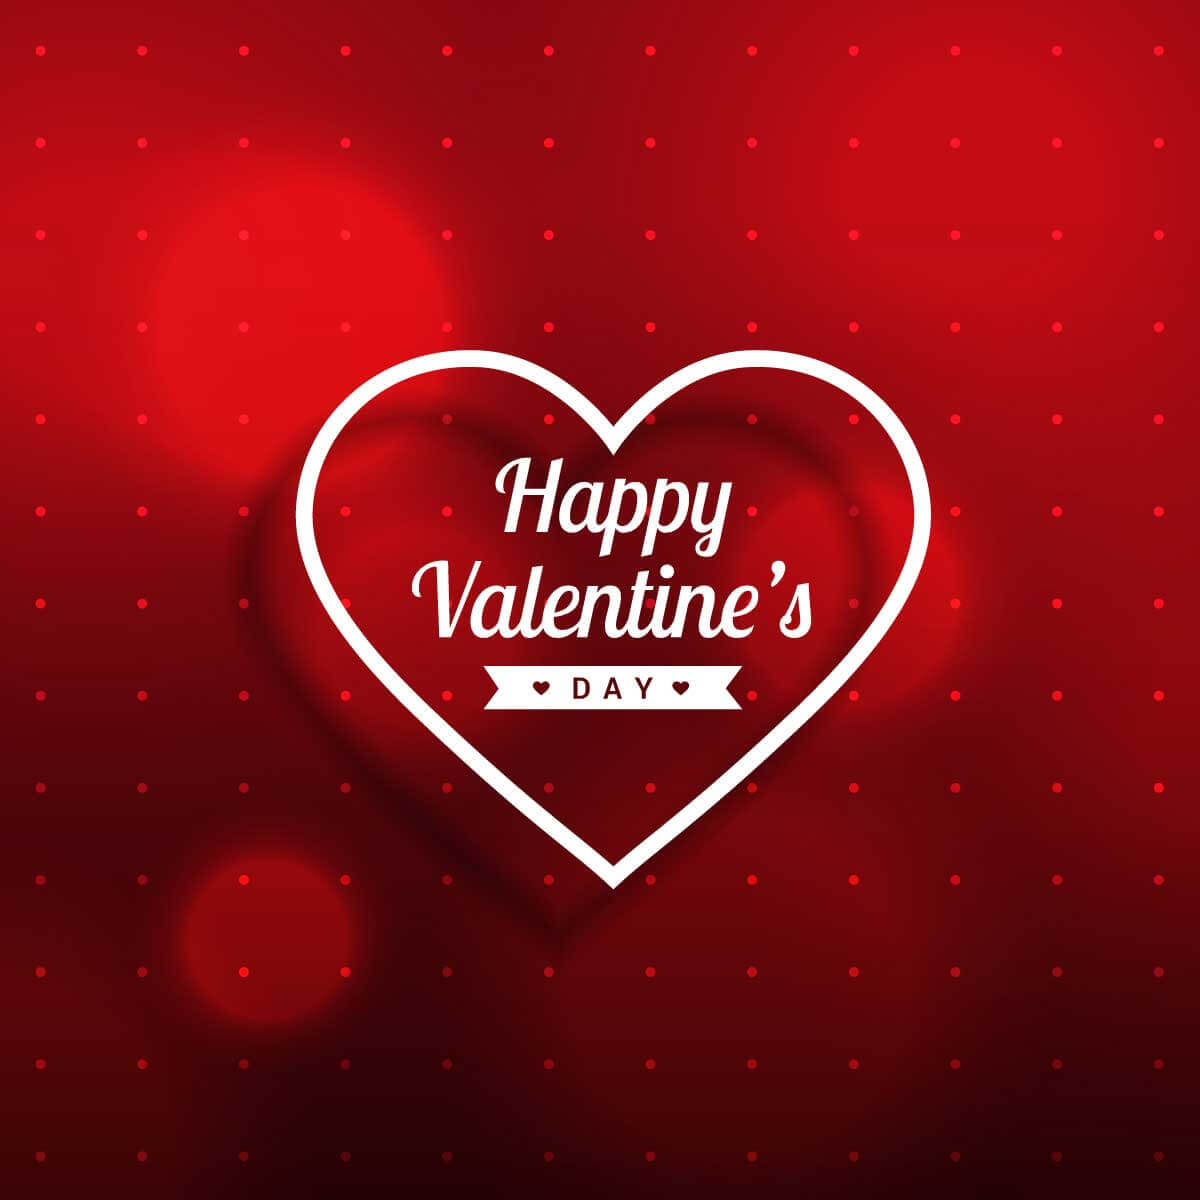 Valentines Day Images, Pictures and Photos Free Download